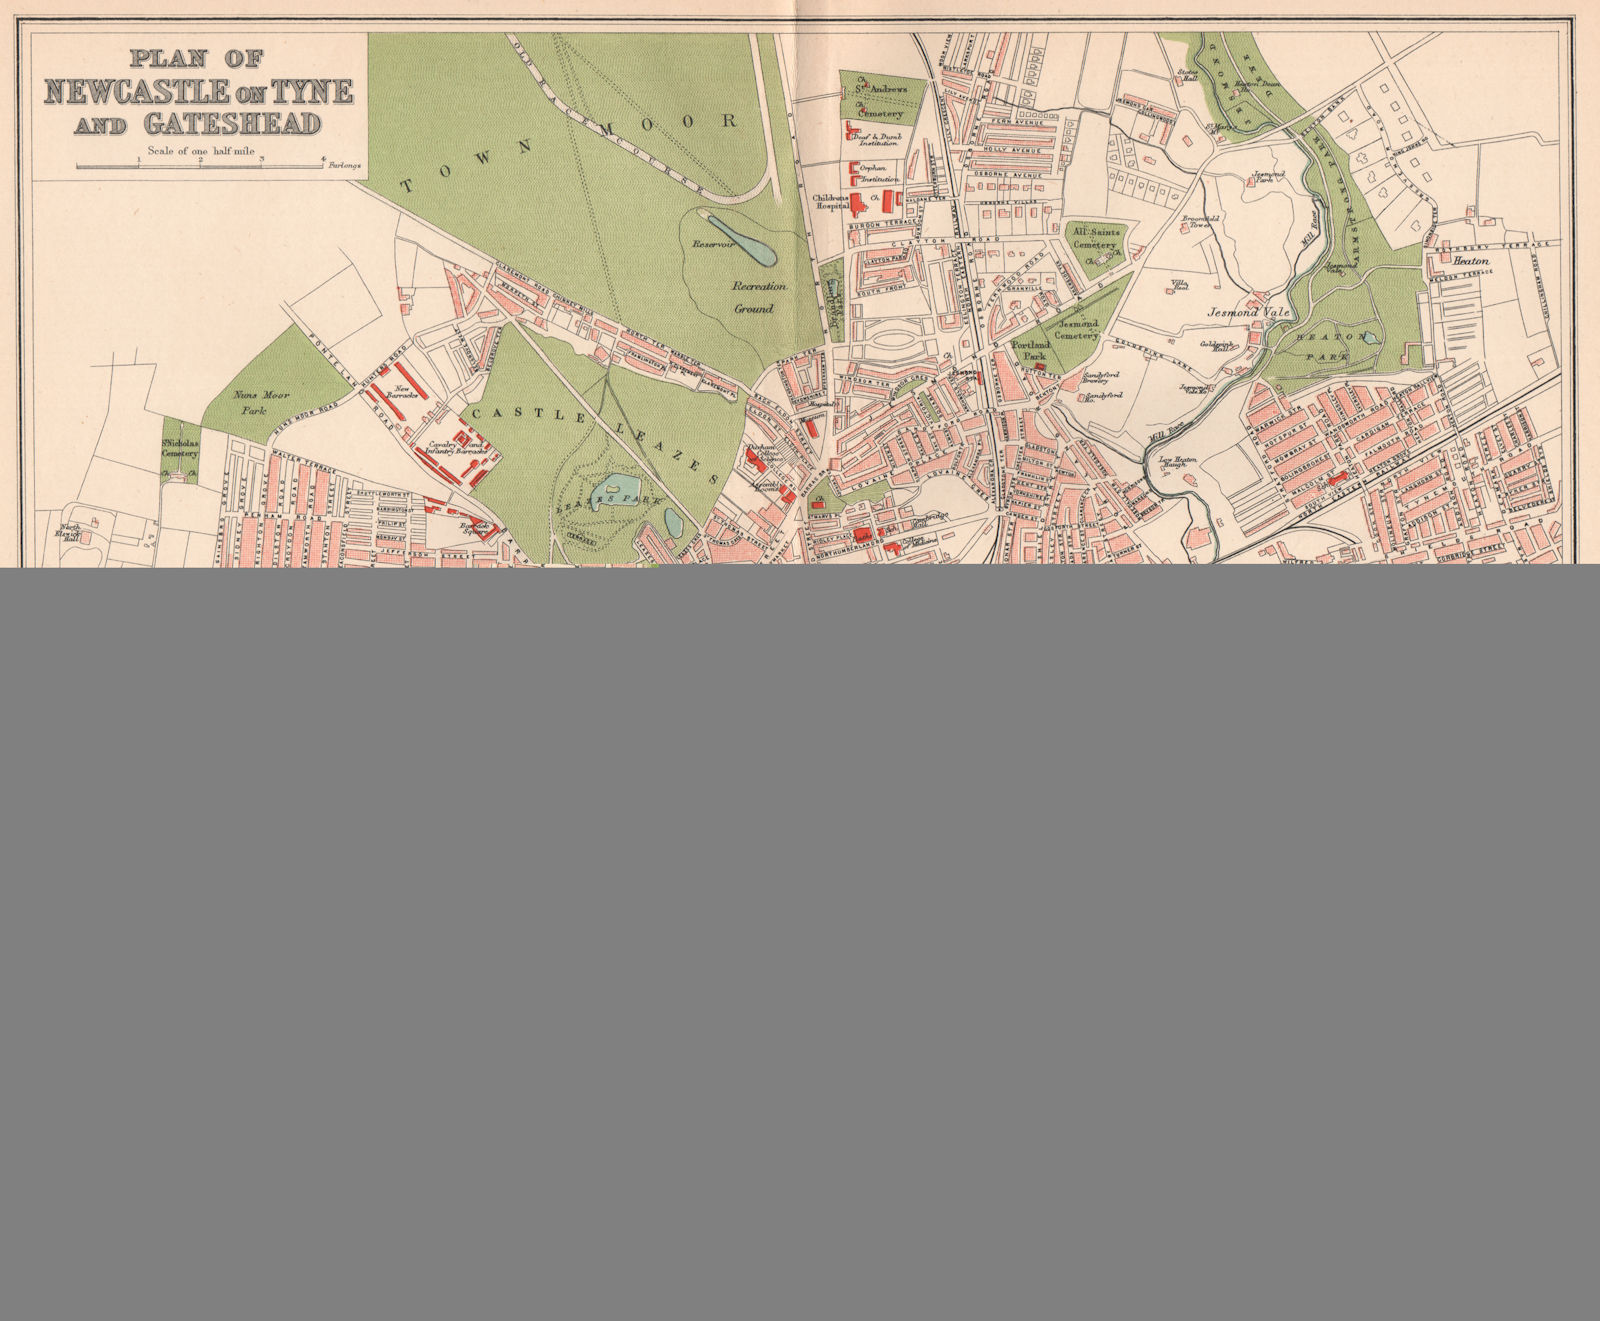 Associate Product NEWCASTLE ON TYNE AND GATESHEAD. Antique town/city map plan. Northumberland 1893